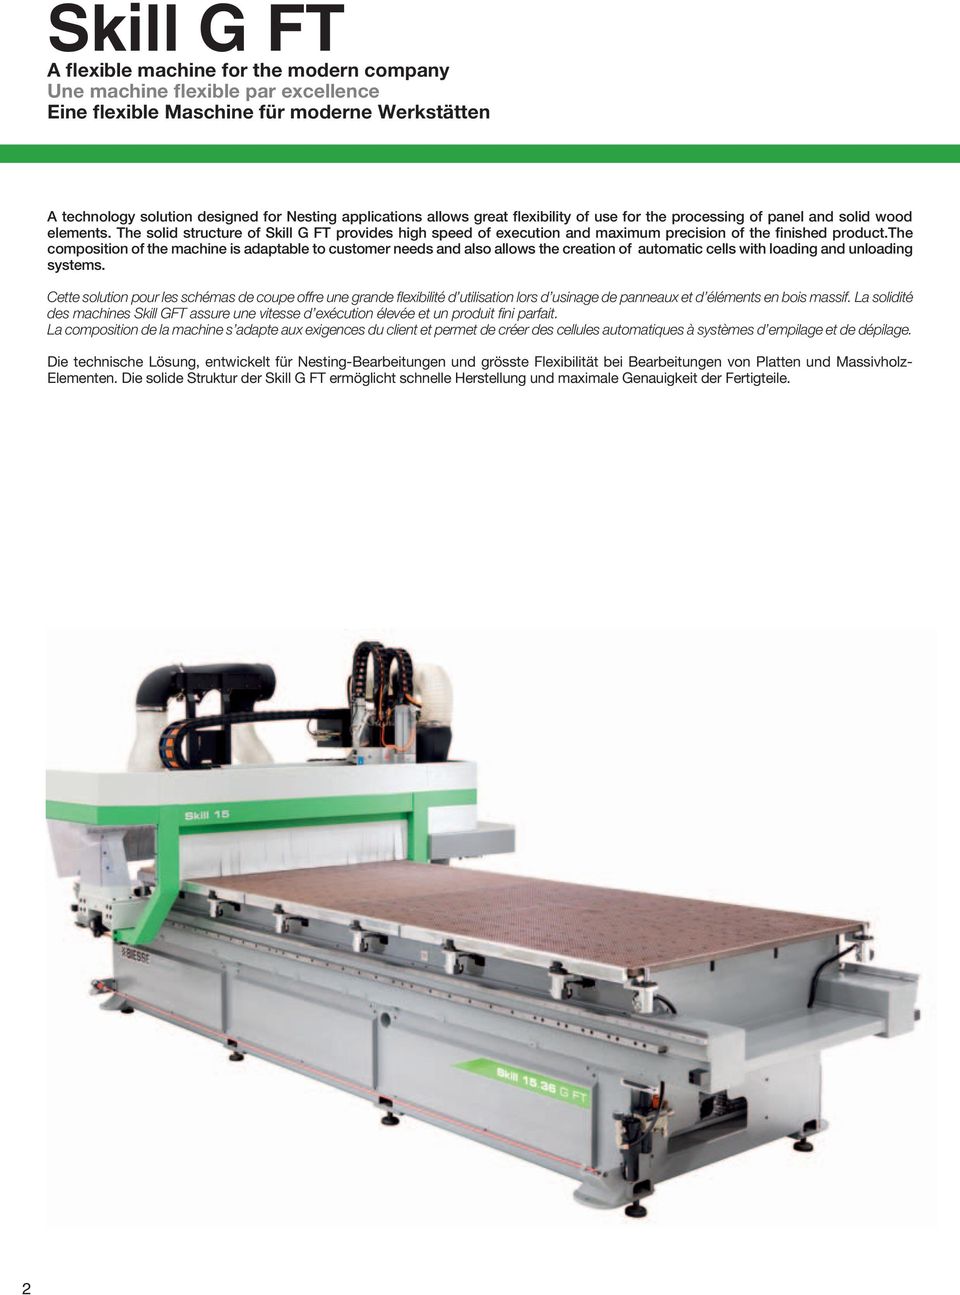 the composition of the machine is adaptable to customer needs and also allows the creation of automatic cells with loading and unloading systems.